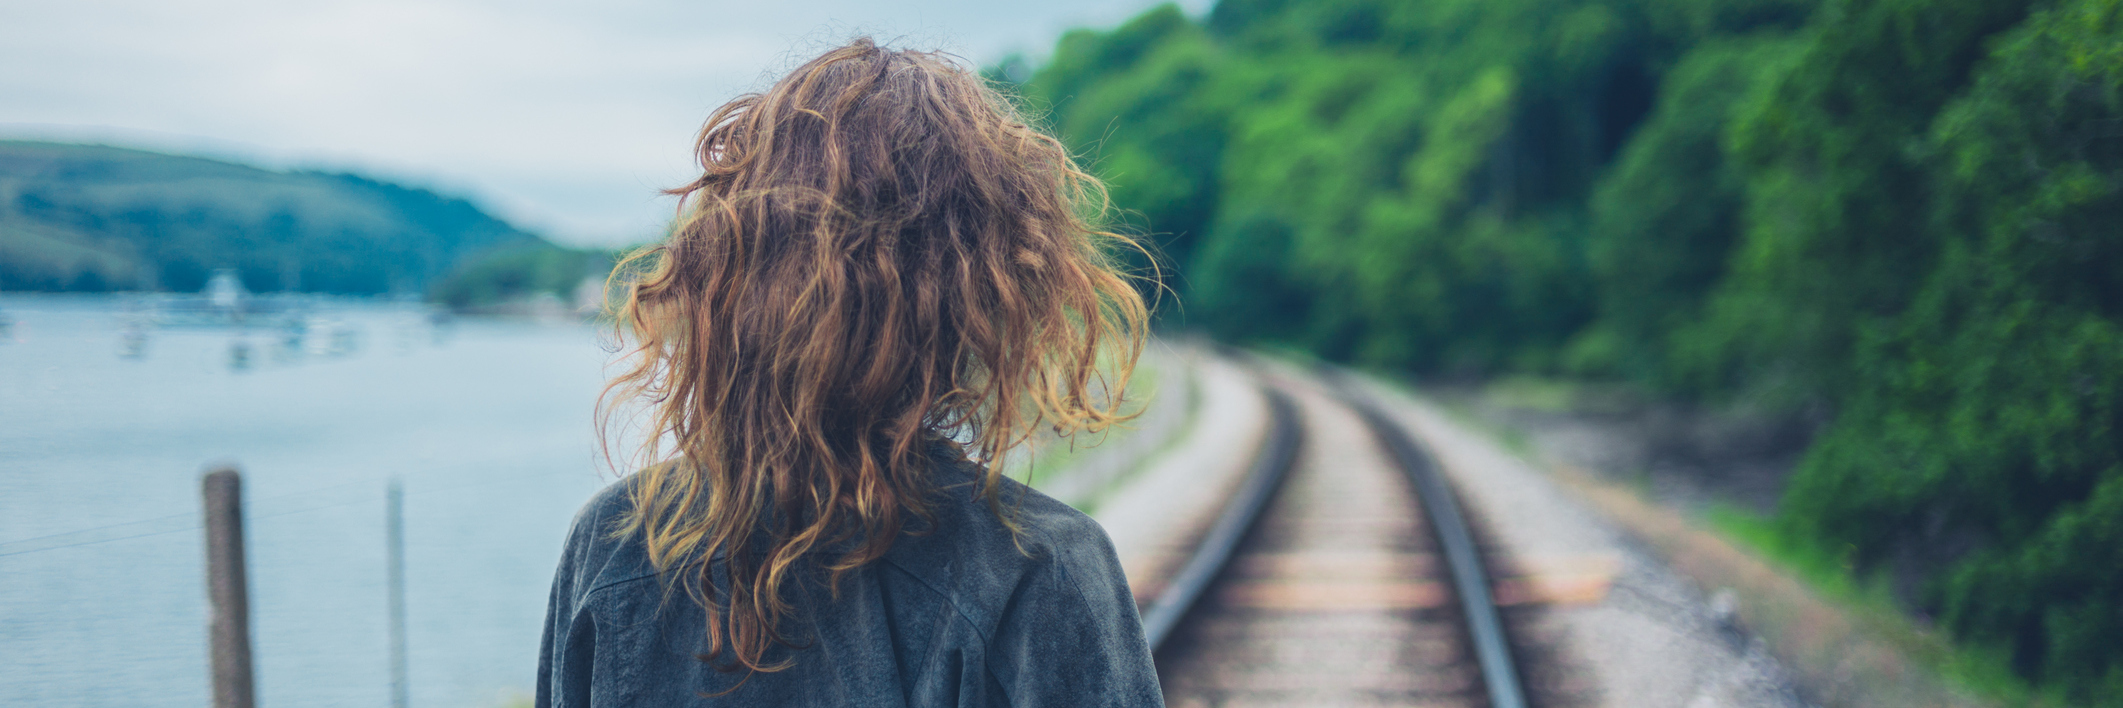 A young woman is walking on the railroad tracks